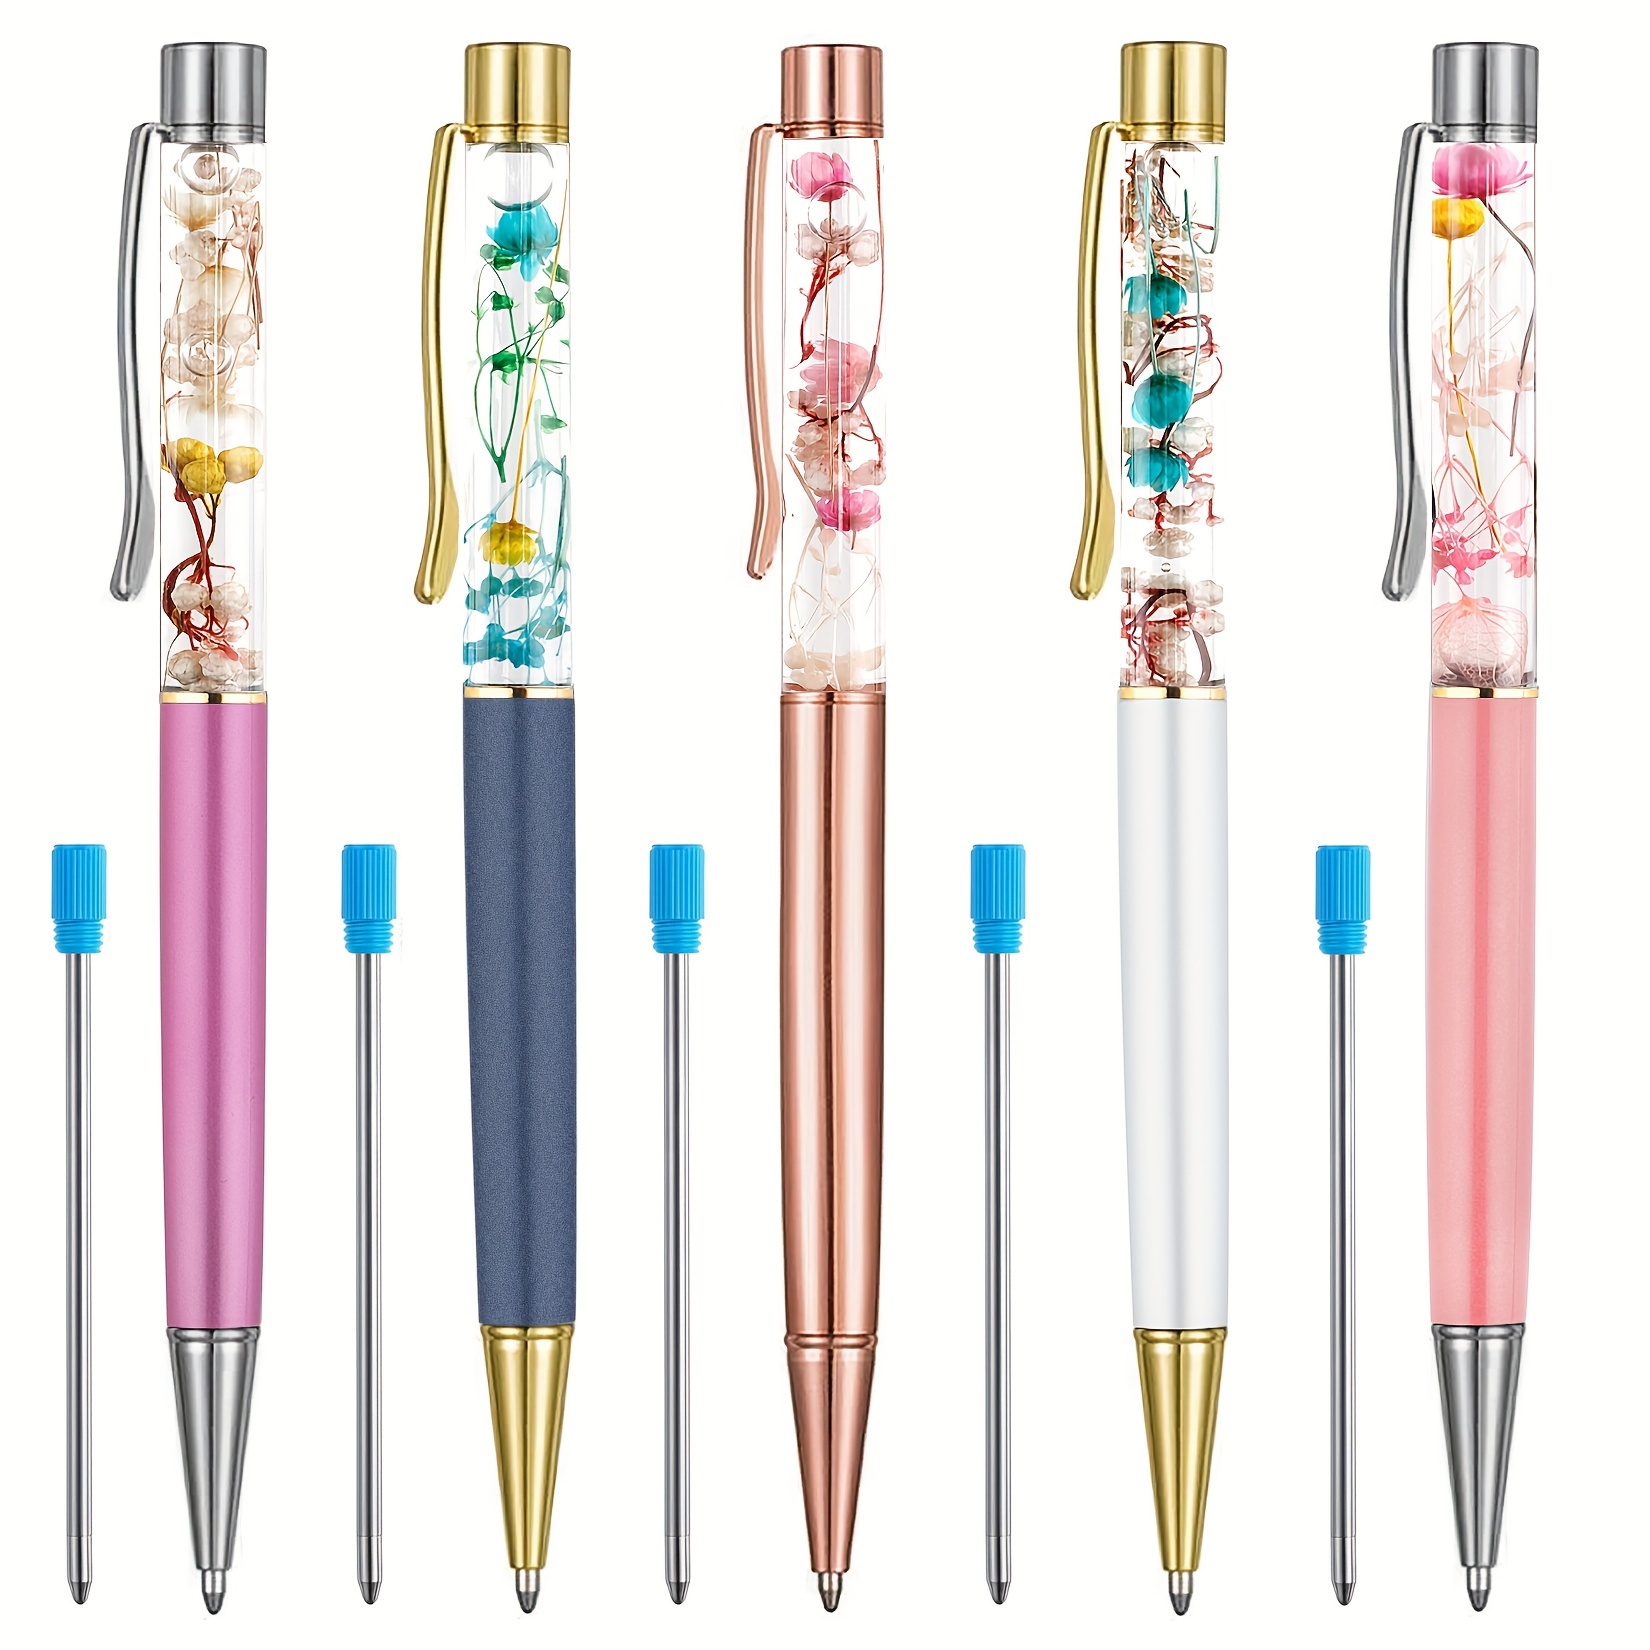 

Dried Flower Ballpoint Pens - 5 Pack Metal Twist Pens With Medium Point And Round Body, Blue Ink Writing Pens For Ages 14+ School And Desk Supplies